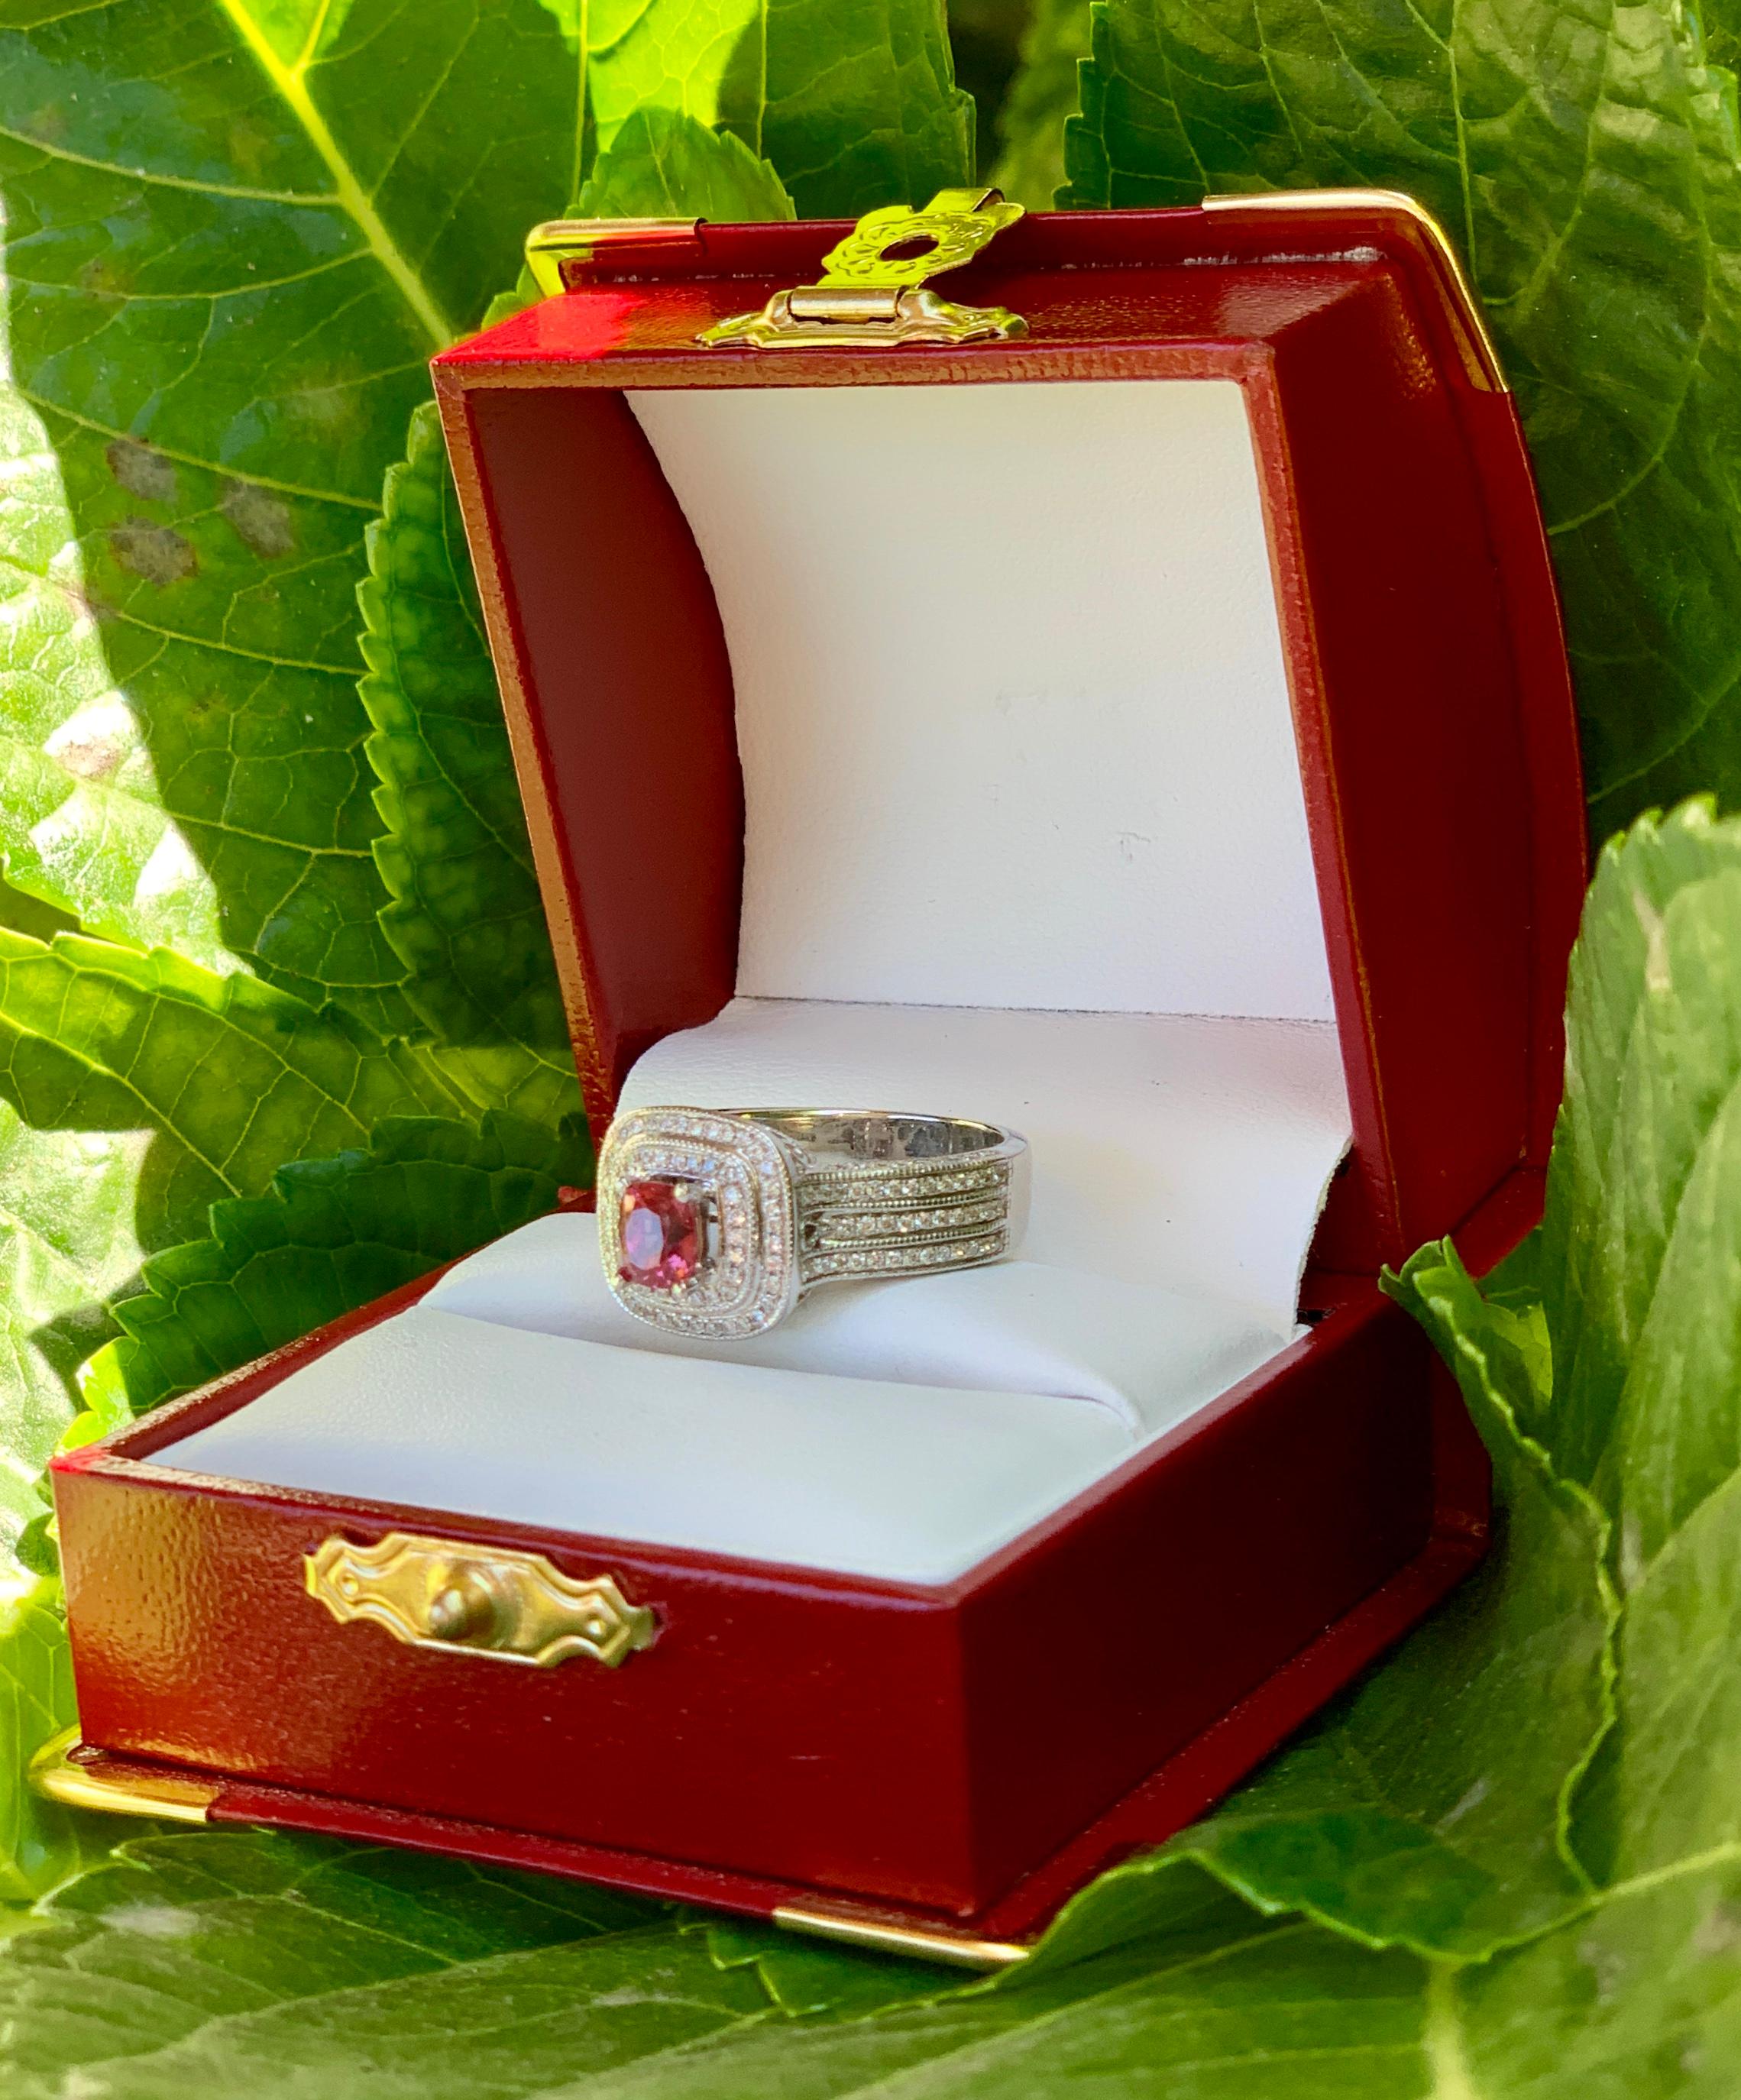 Elegant 1.65 carat ring features a vivid and sparkling, rectangular cushion cut pink sapphire prong set in 14 karat white gold and surrounded by a stepped, double diamond micro pave halo.  Ring is beautifully detailed, with 3 rows of micro pave